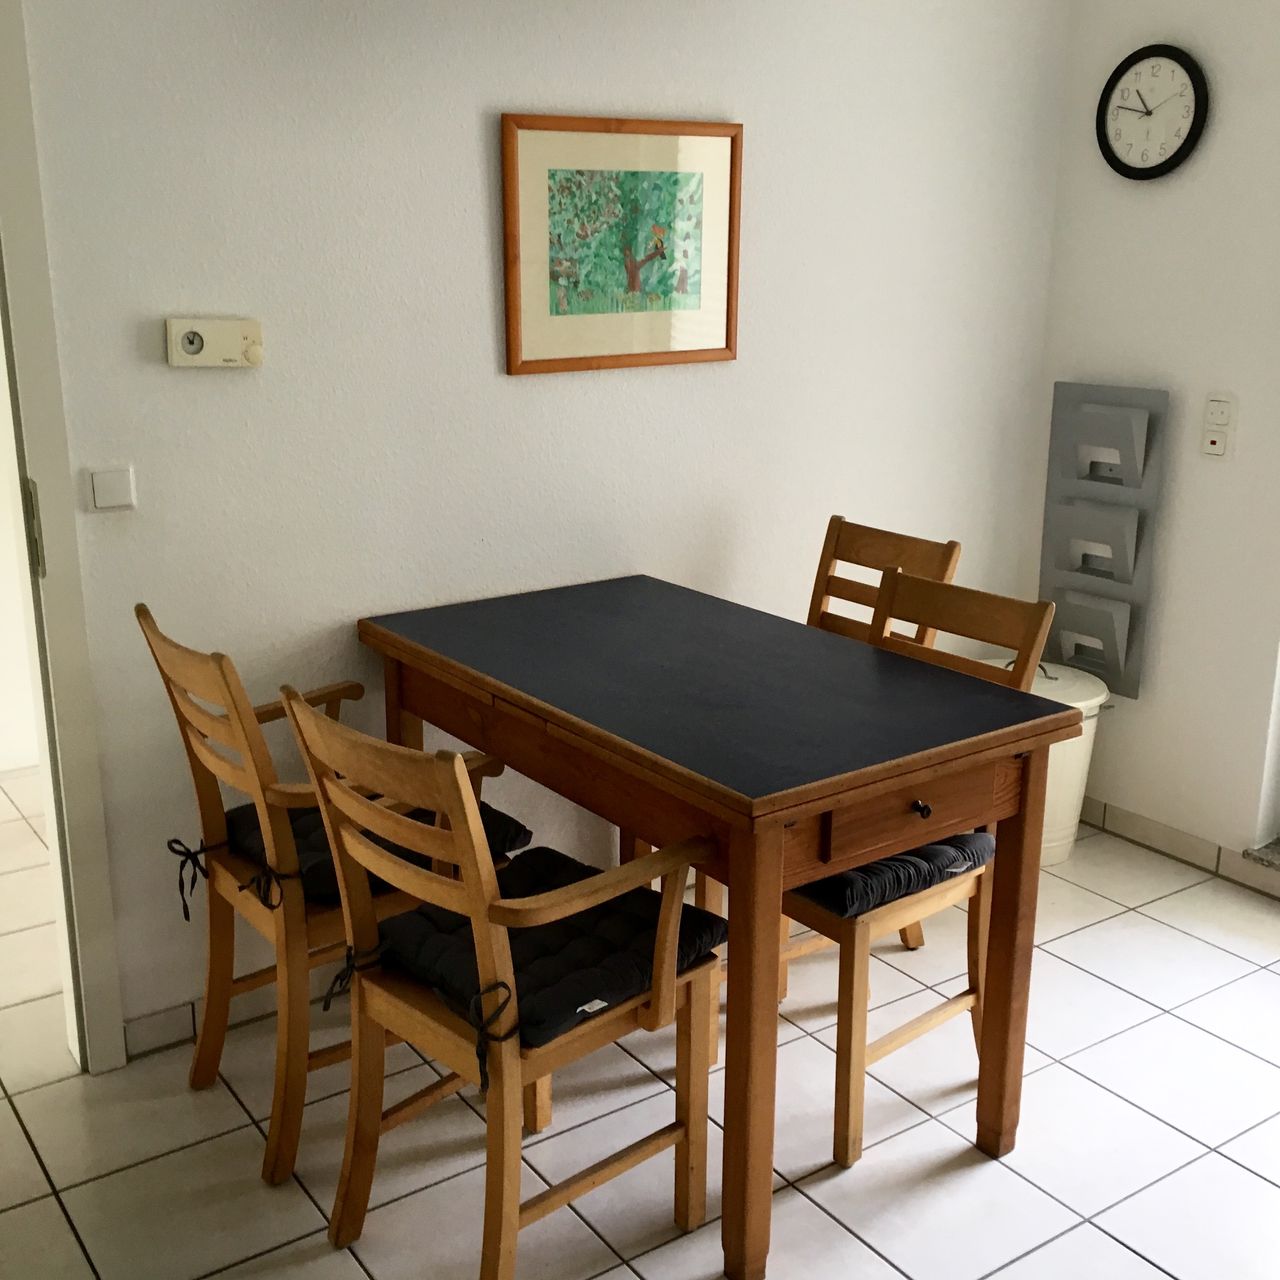 Derendorf: Bright apartment with garage in the building and elevator in a quiet cul-de-sac